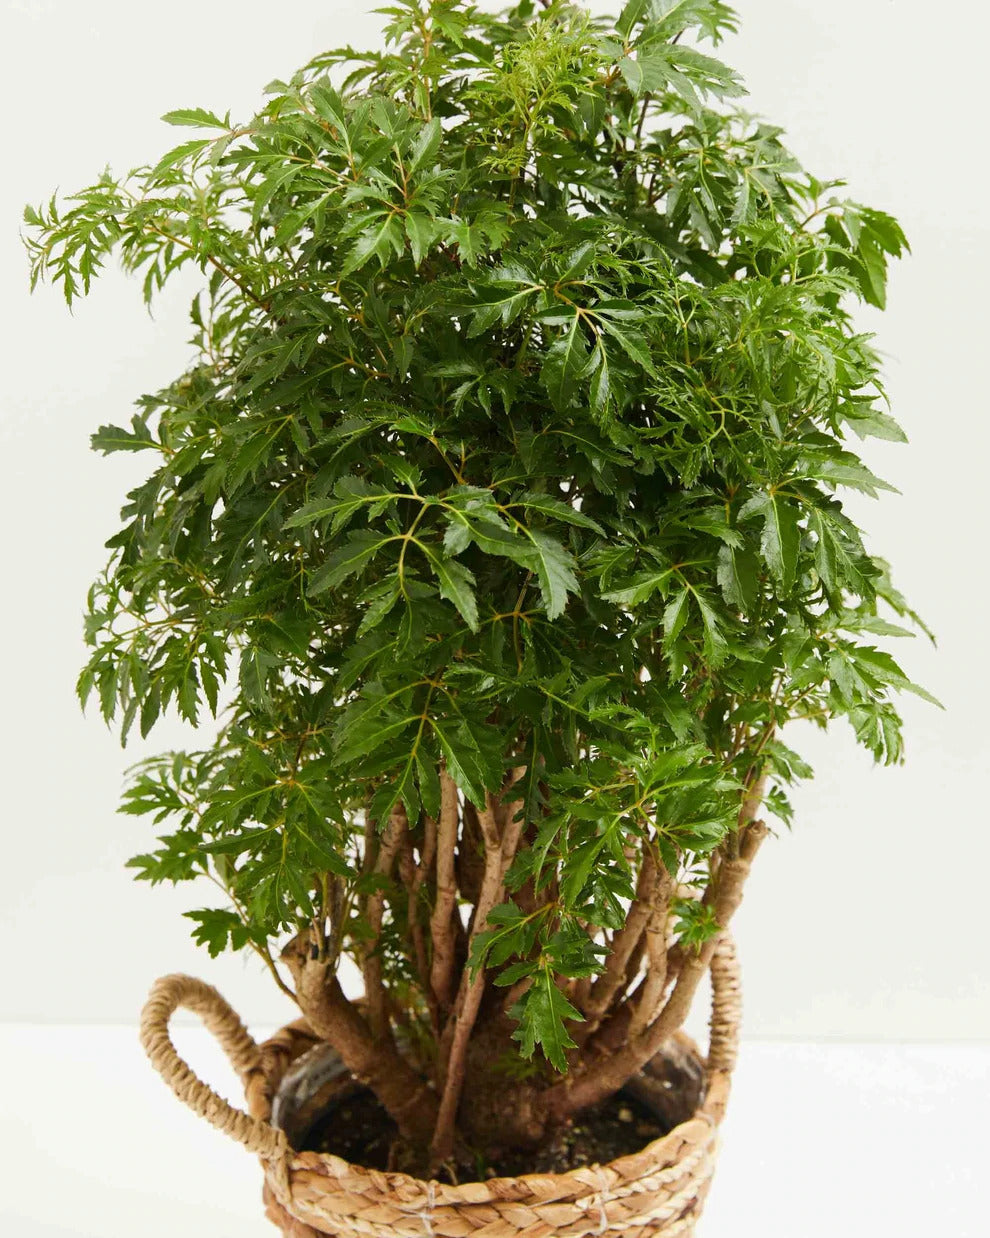 How to Grow and Care for your Aralia Ming Stump